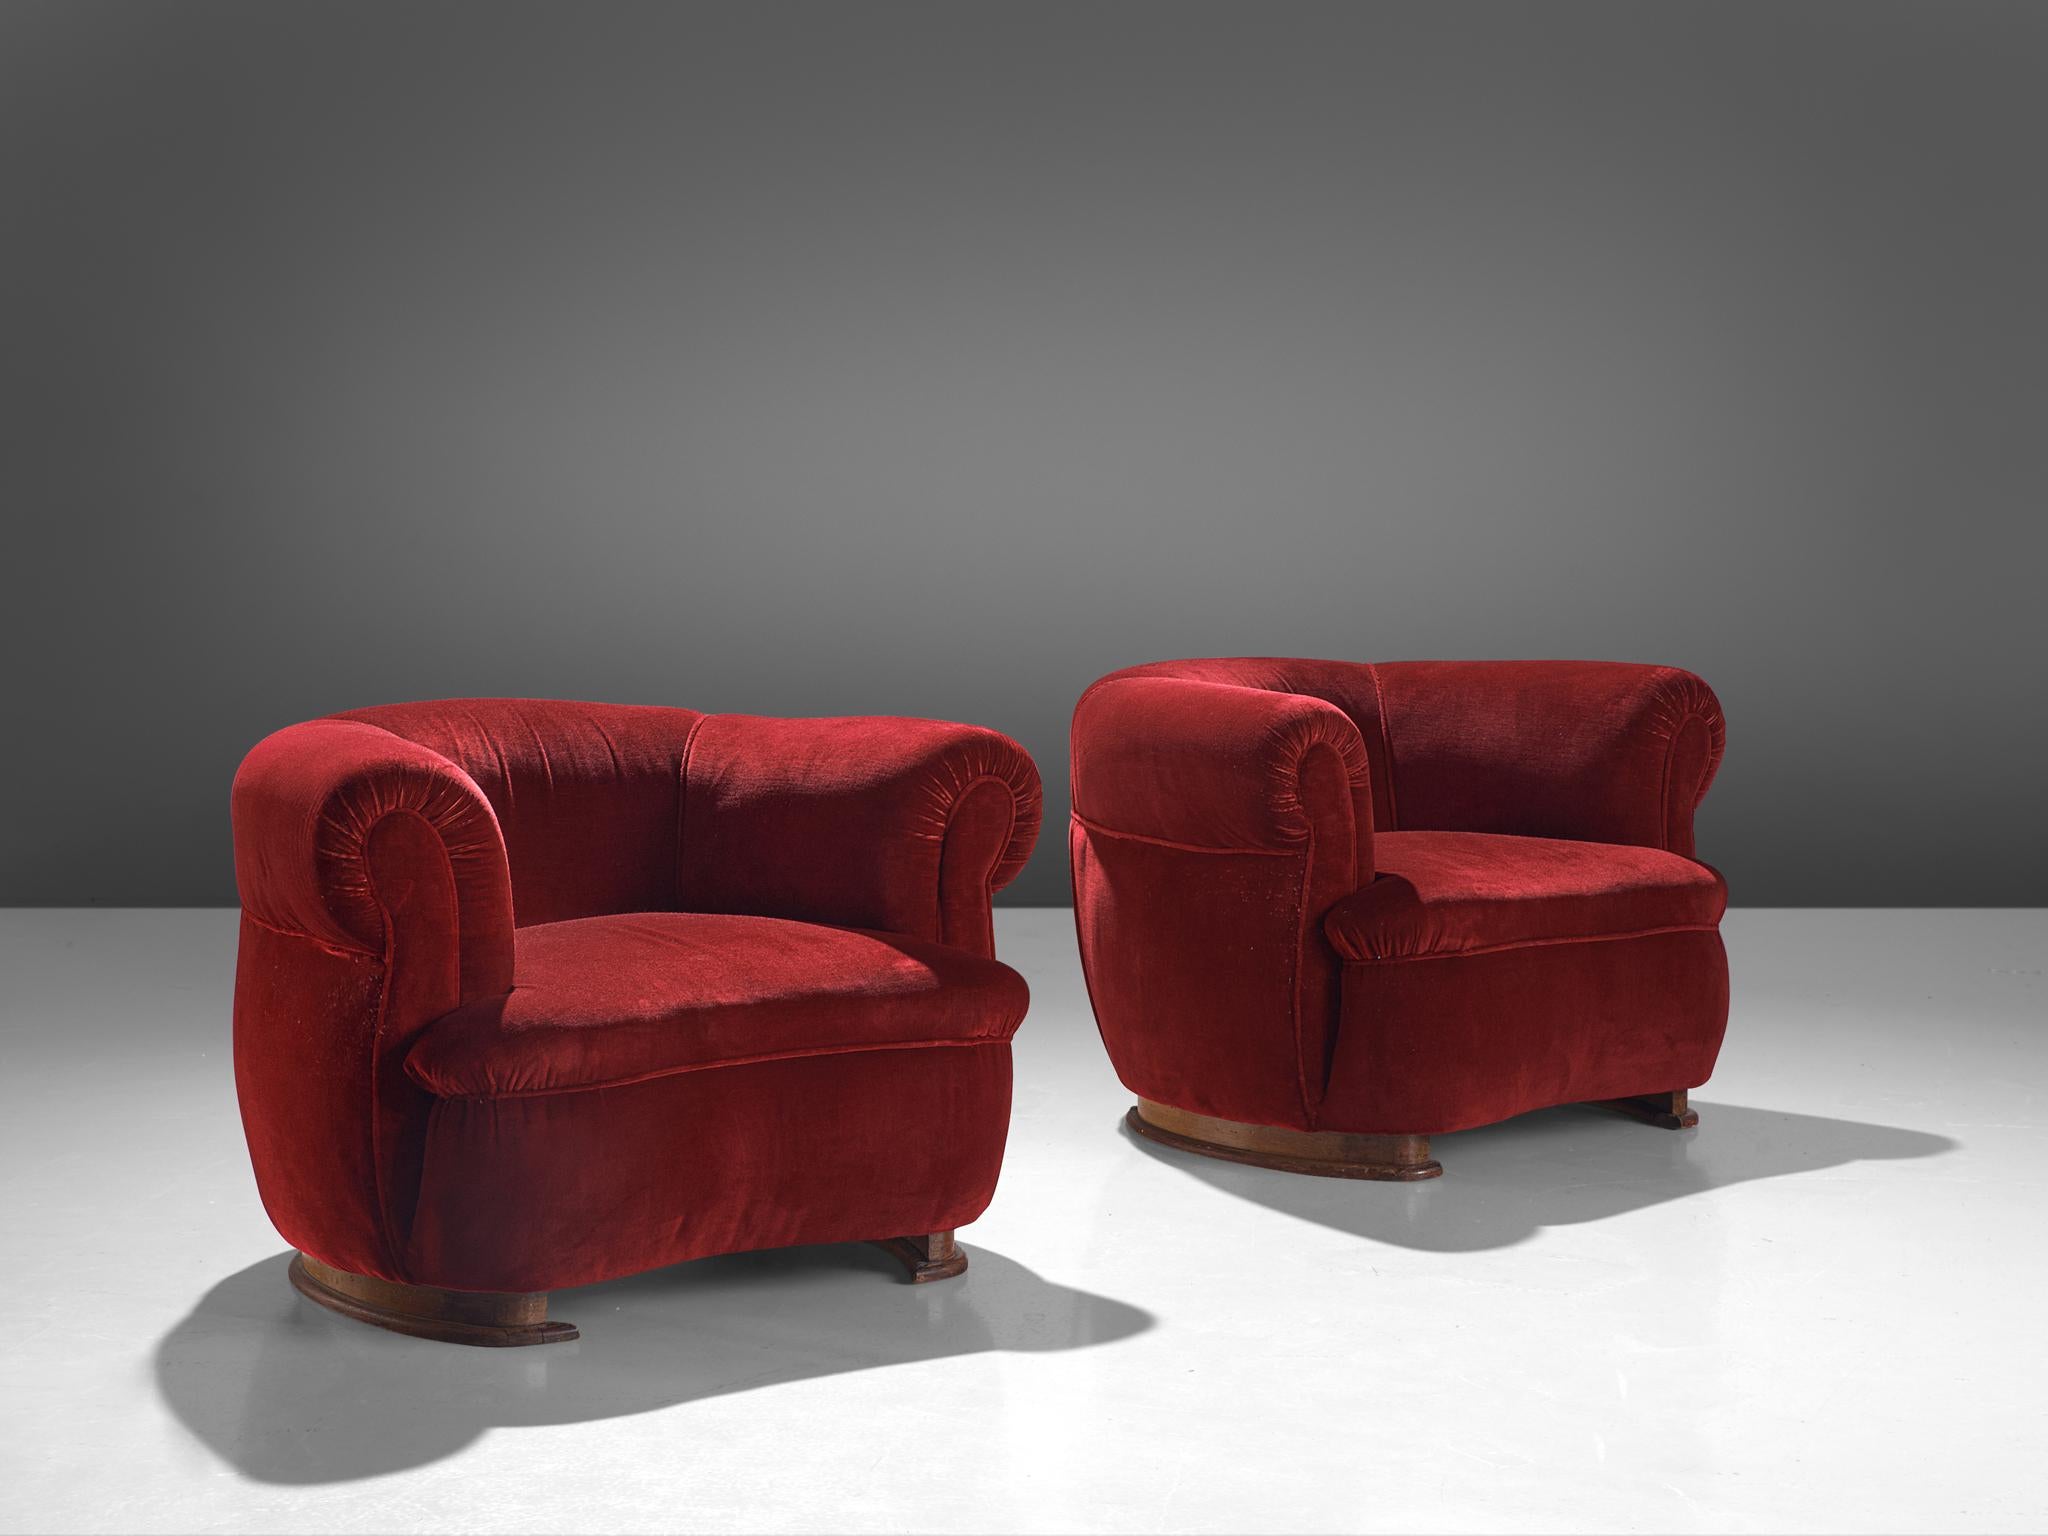 Pair of French lounge chairs, red velvet upholstery, oak, France, 1940s
 
These exquisite pair of lounge chairs of French origin undoubtedly breathes the late Art Deco Period of the 1940s. The design has a certain theatrical aesthetic with curved